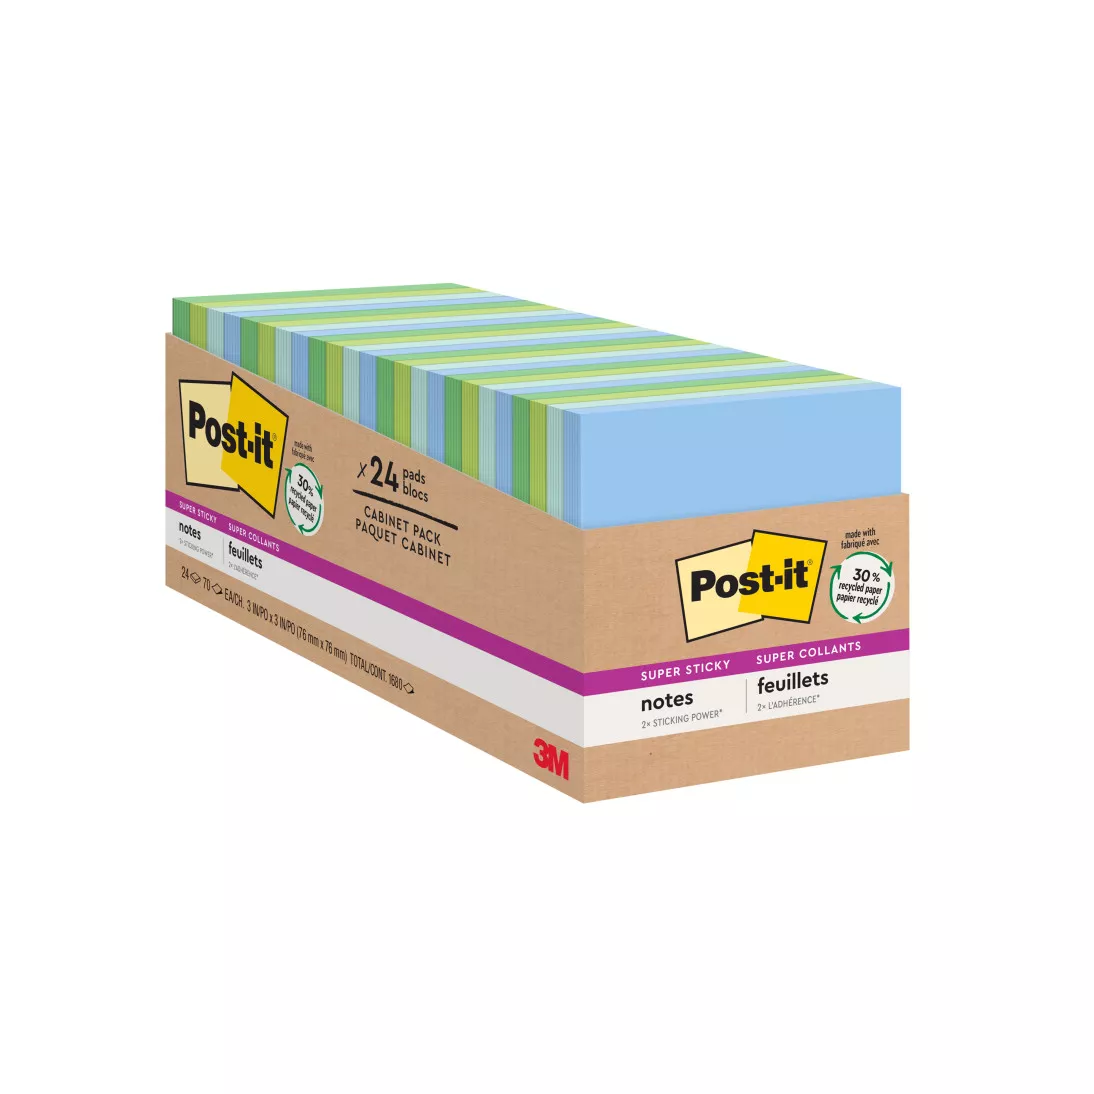 Post-it® Super Sticky Recycled Notes 654-24SST-CP, 3 in x 3 in (76 mm x
76 mm) Bora Bora Collection